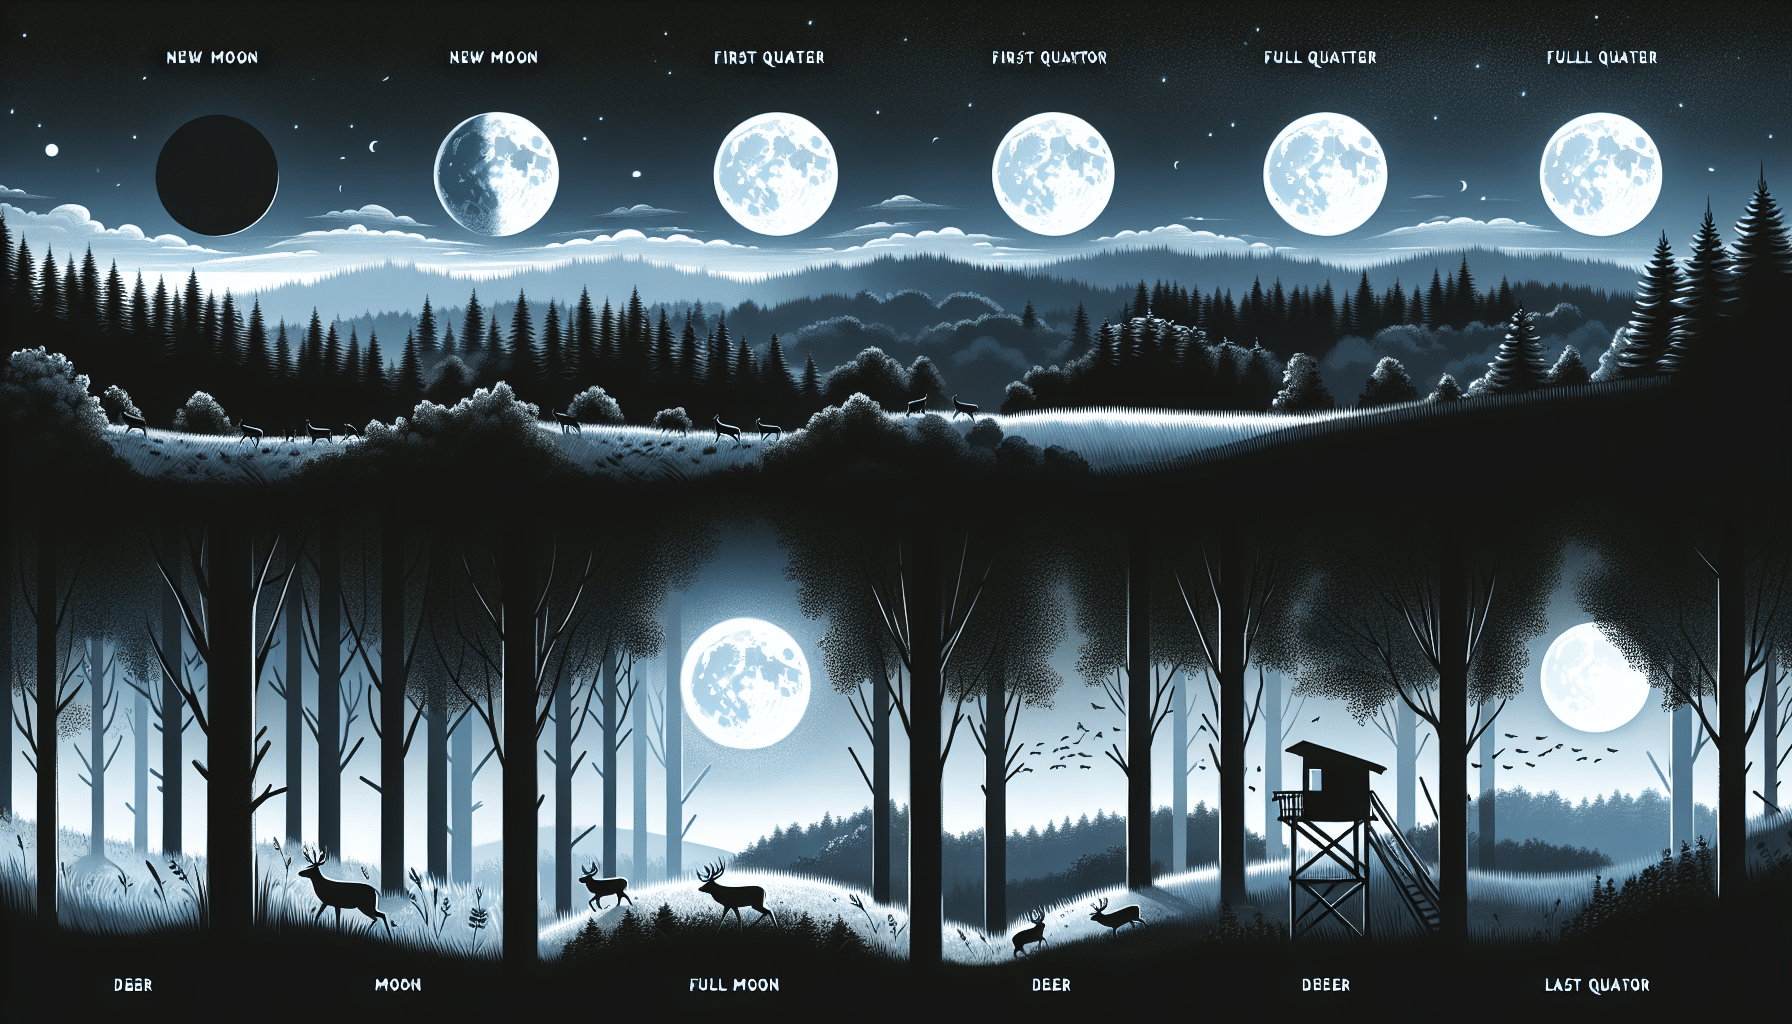 Illustrate a serene landscape under the different phases of the moon such as a new moon, first quarter moon, full moon, and last quarter moon, transforming over a dense forest. Show traces of gentle deer movement with discernible deer tracks, and subtle signs of hunting like an unmanned tree stand, and scattered hunting arrows, without showcasing humans or human activity. Ensure no brands or text are visible. Add a sense of mystery and tranquility to convey the impact of the moon phases on deer activity.